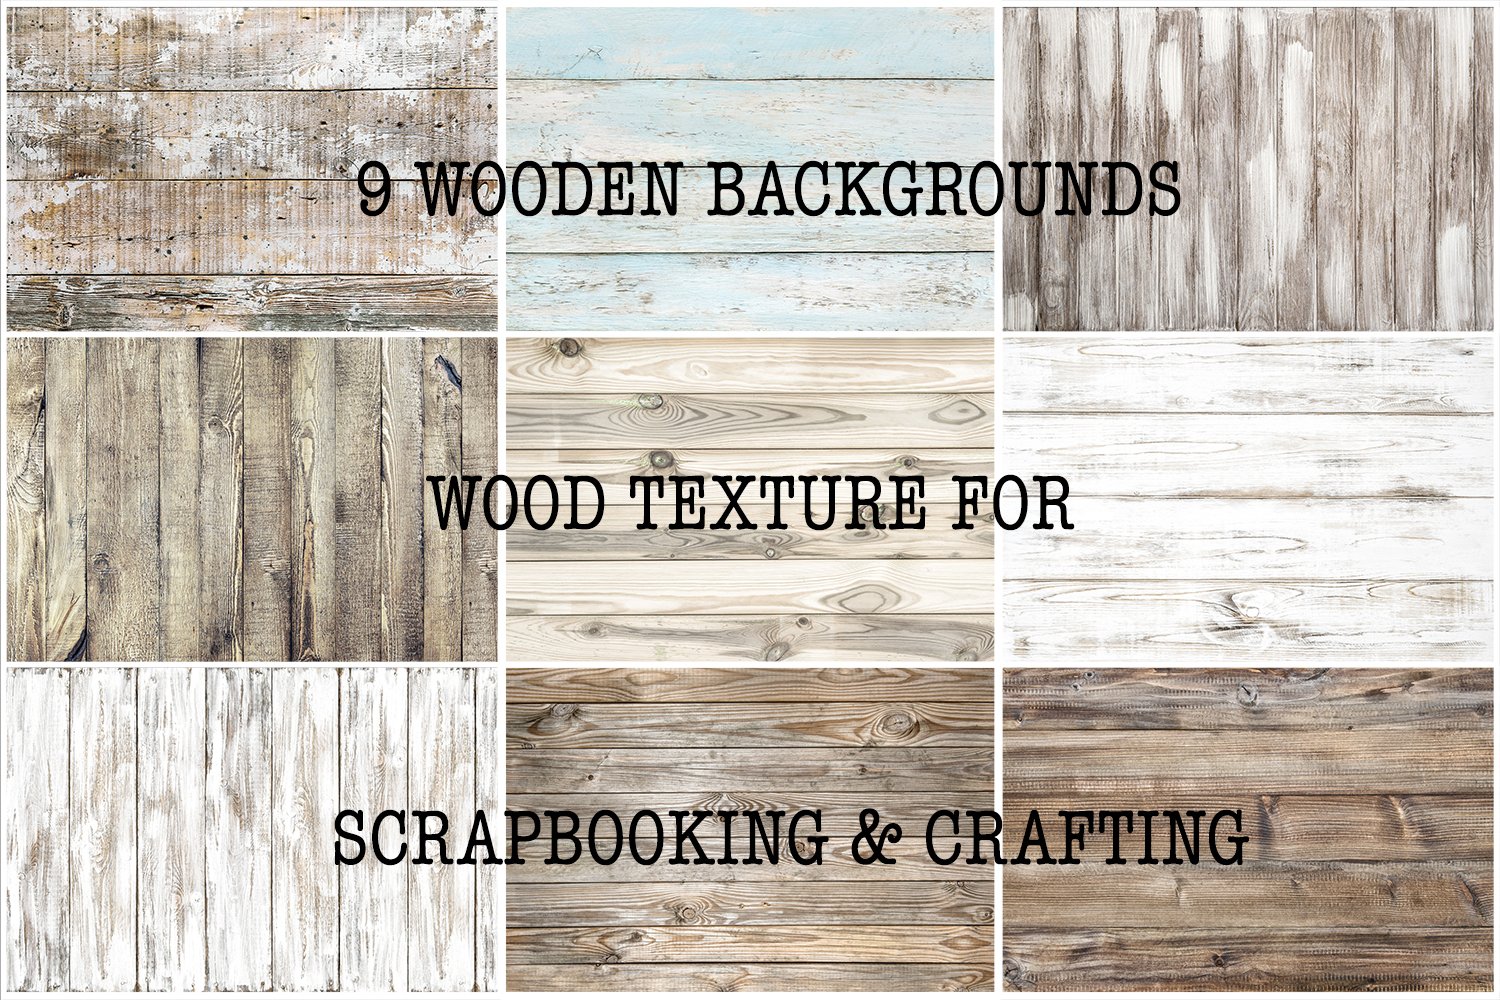 50% Wooden background wood texture cover image.